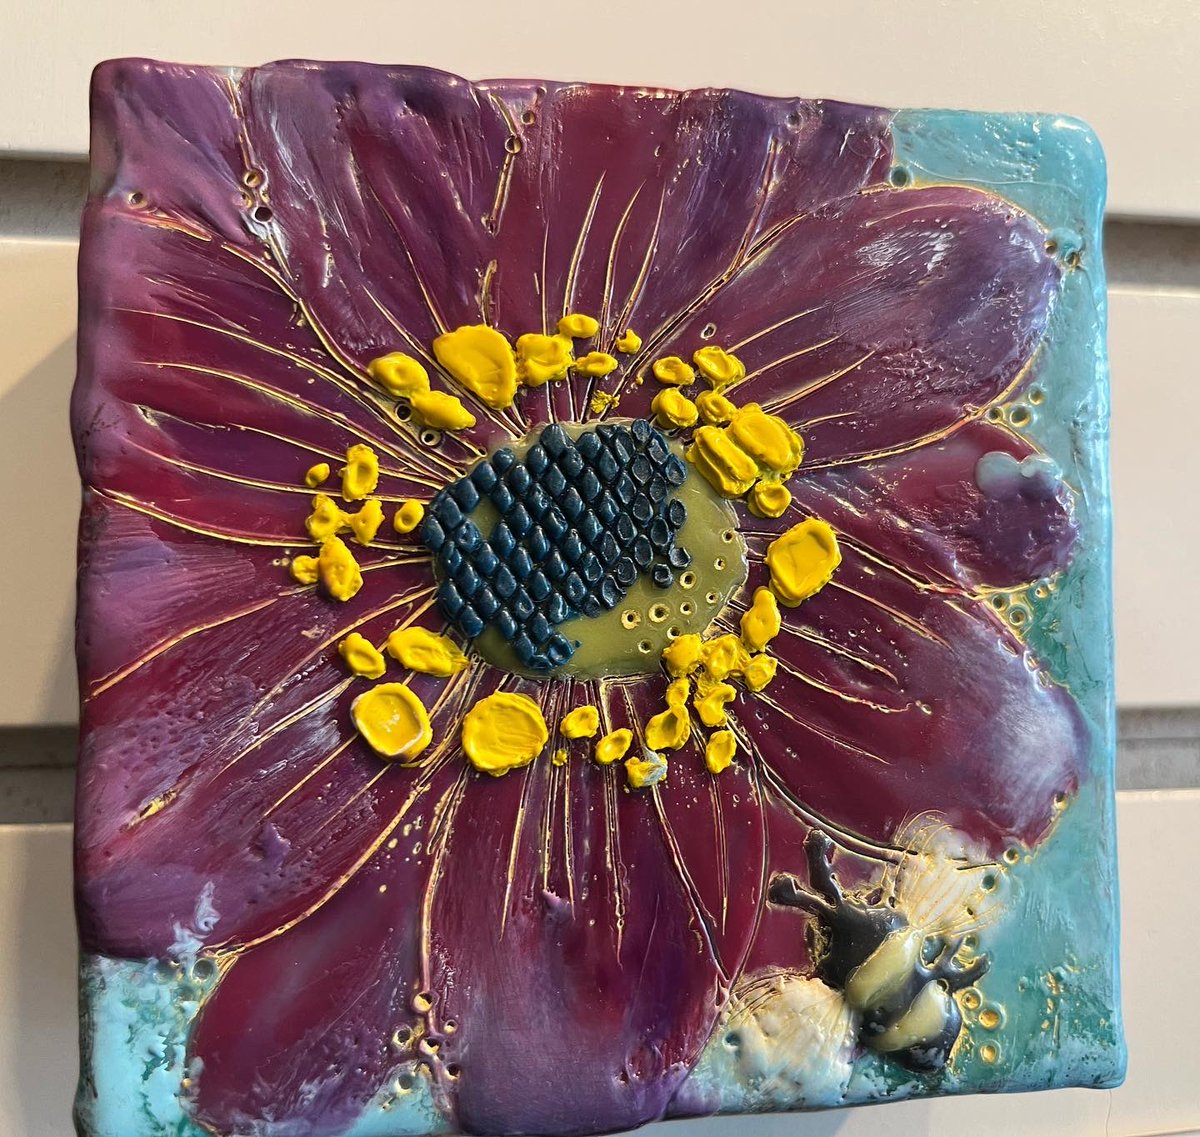 Post office has returned to its usual location, with a new feature artist in the @StevestonHS pop-up gallery. Jennifer James’ colourful “encaustic” artwork is on display for October. #Steveston #RichmondBC